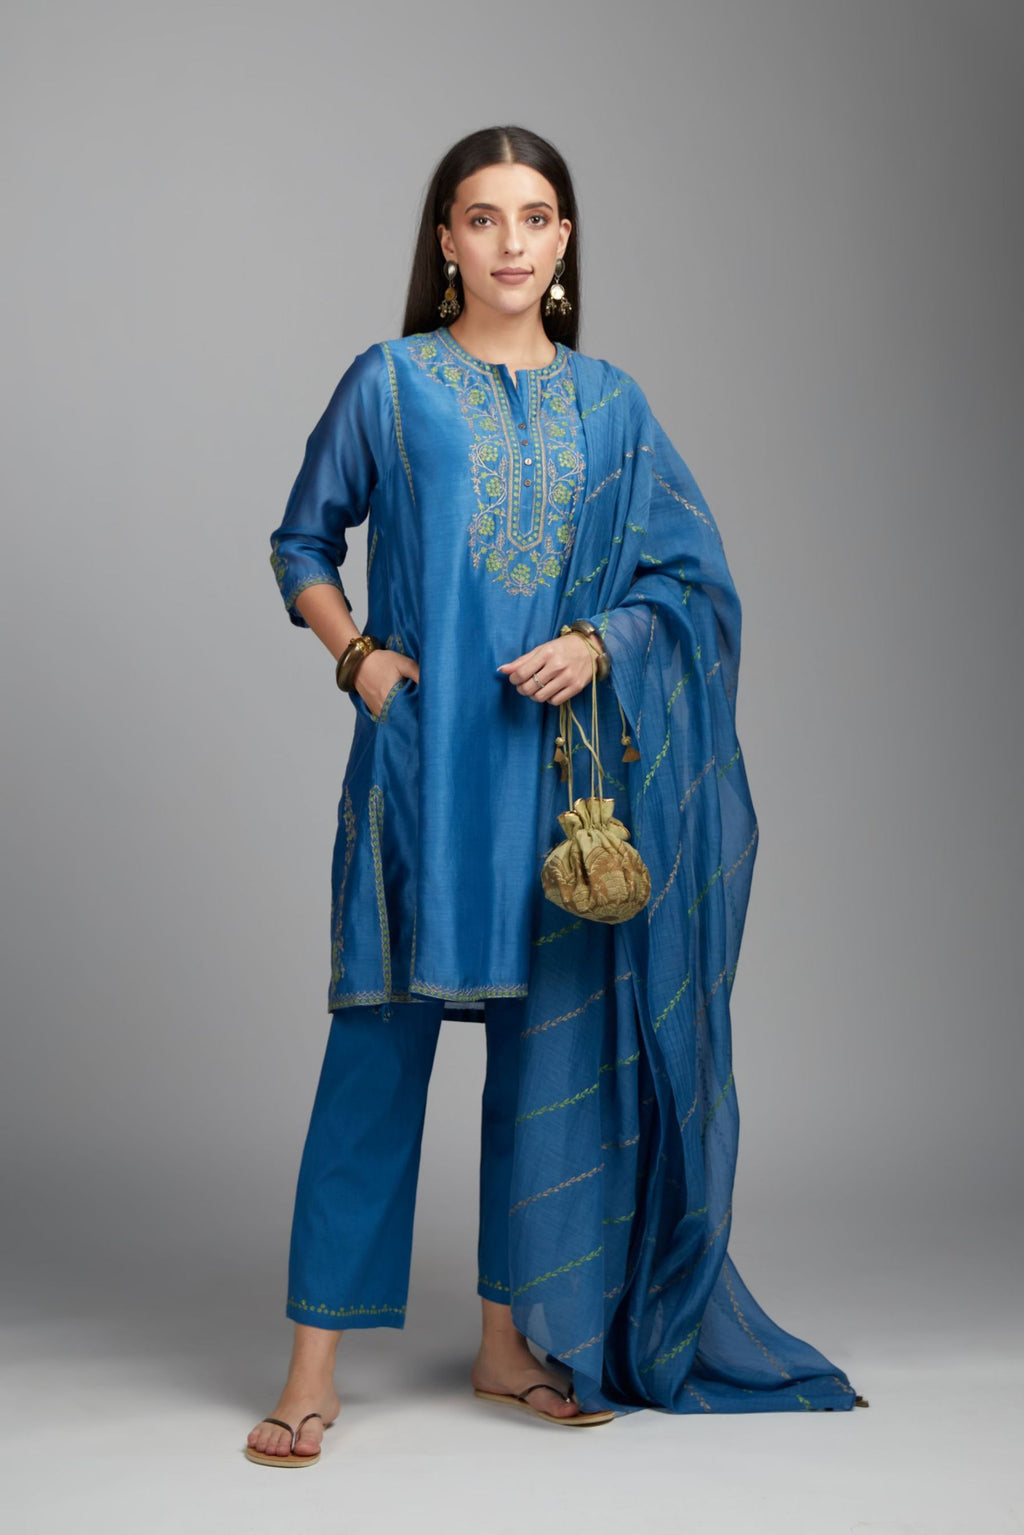 Blue short kalidar kurta set, highlighted with delicate contrast coloured embroidery